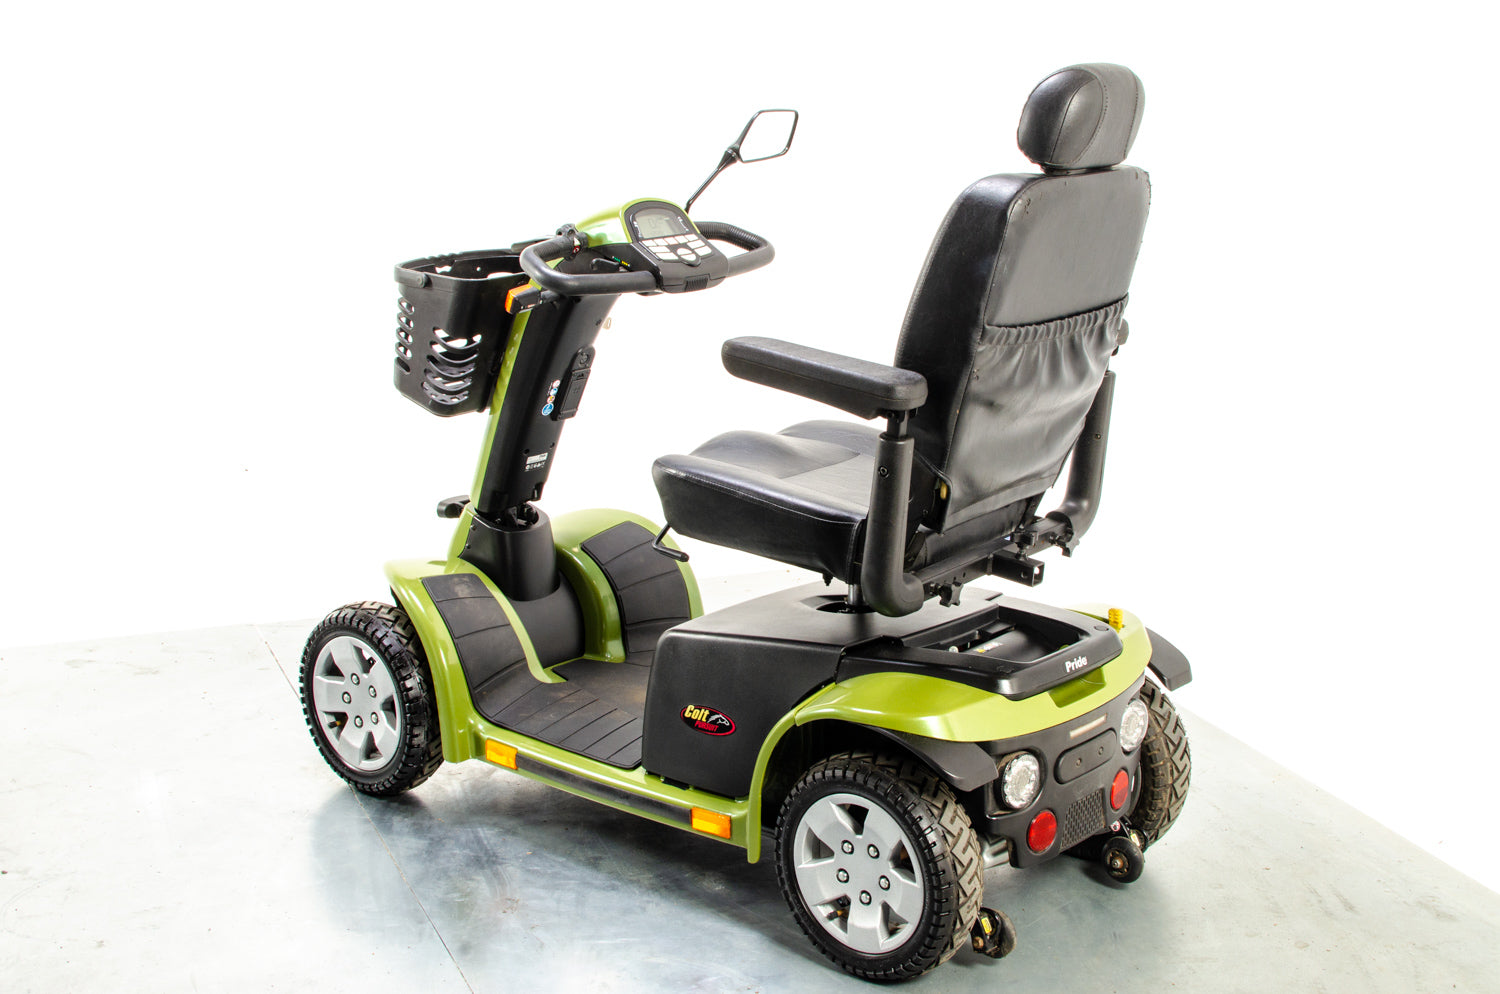 Pride Colt Pursuit Used Mobility Scooter 8mph All-Terrain Transportable Large